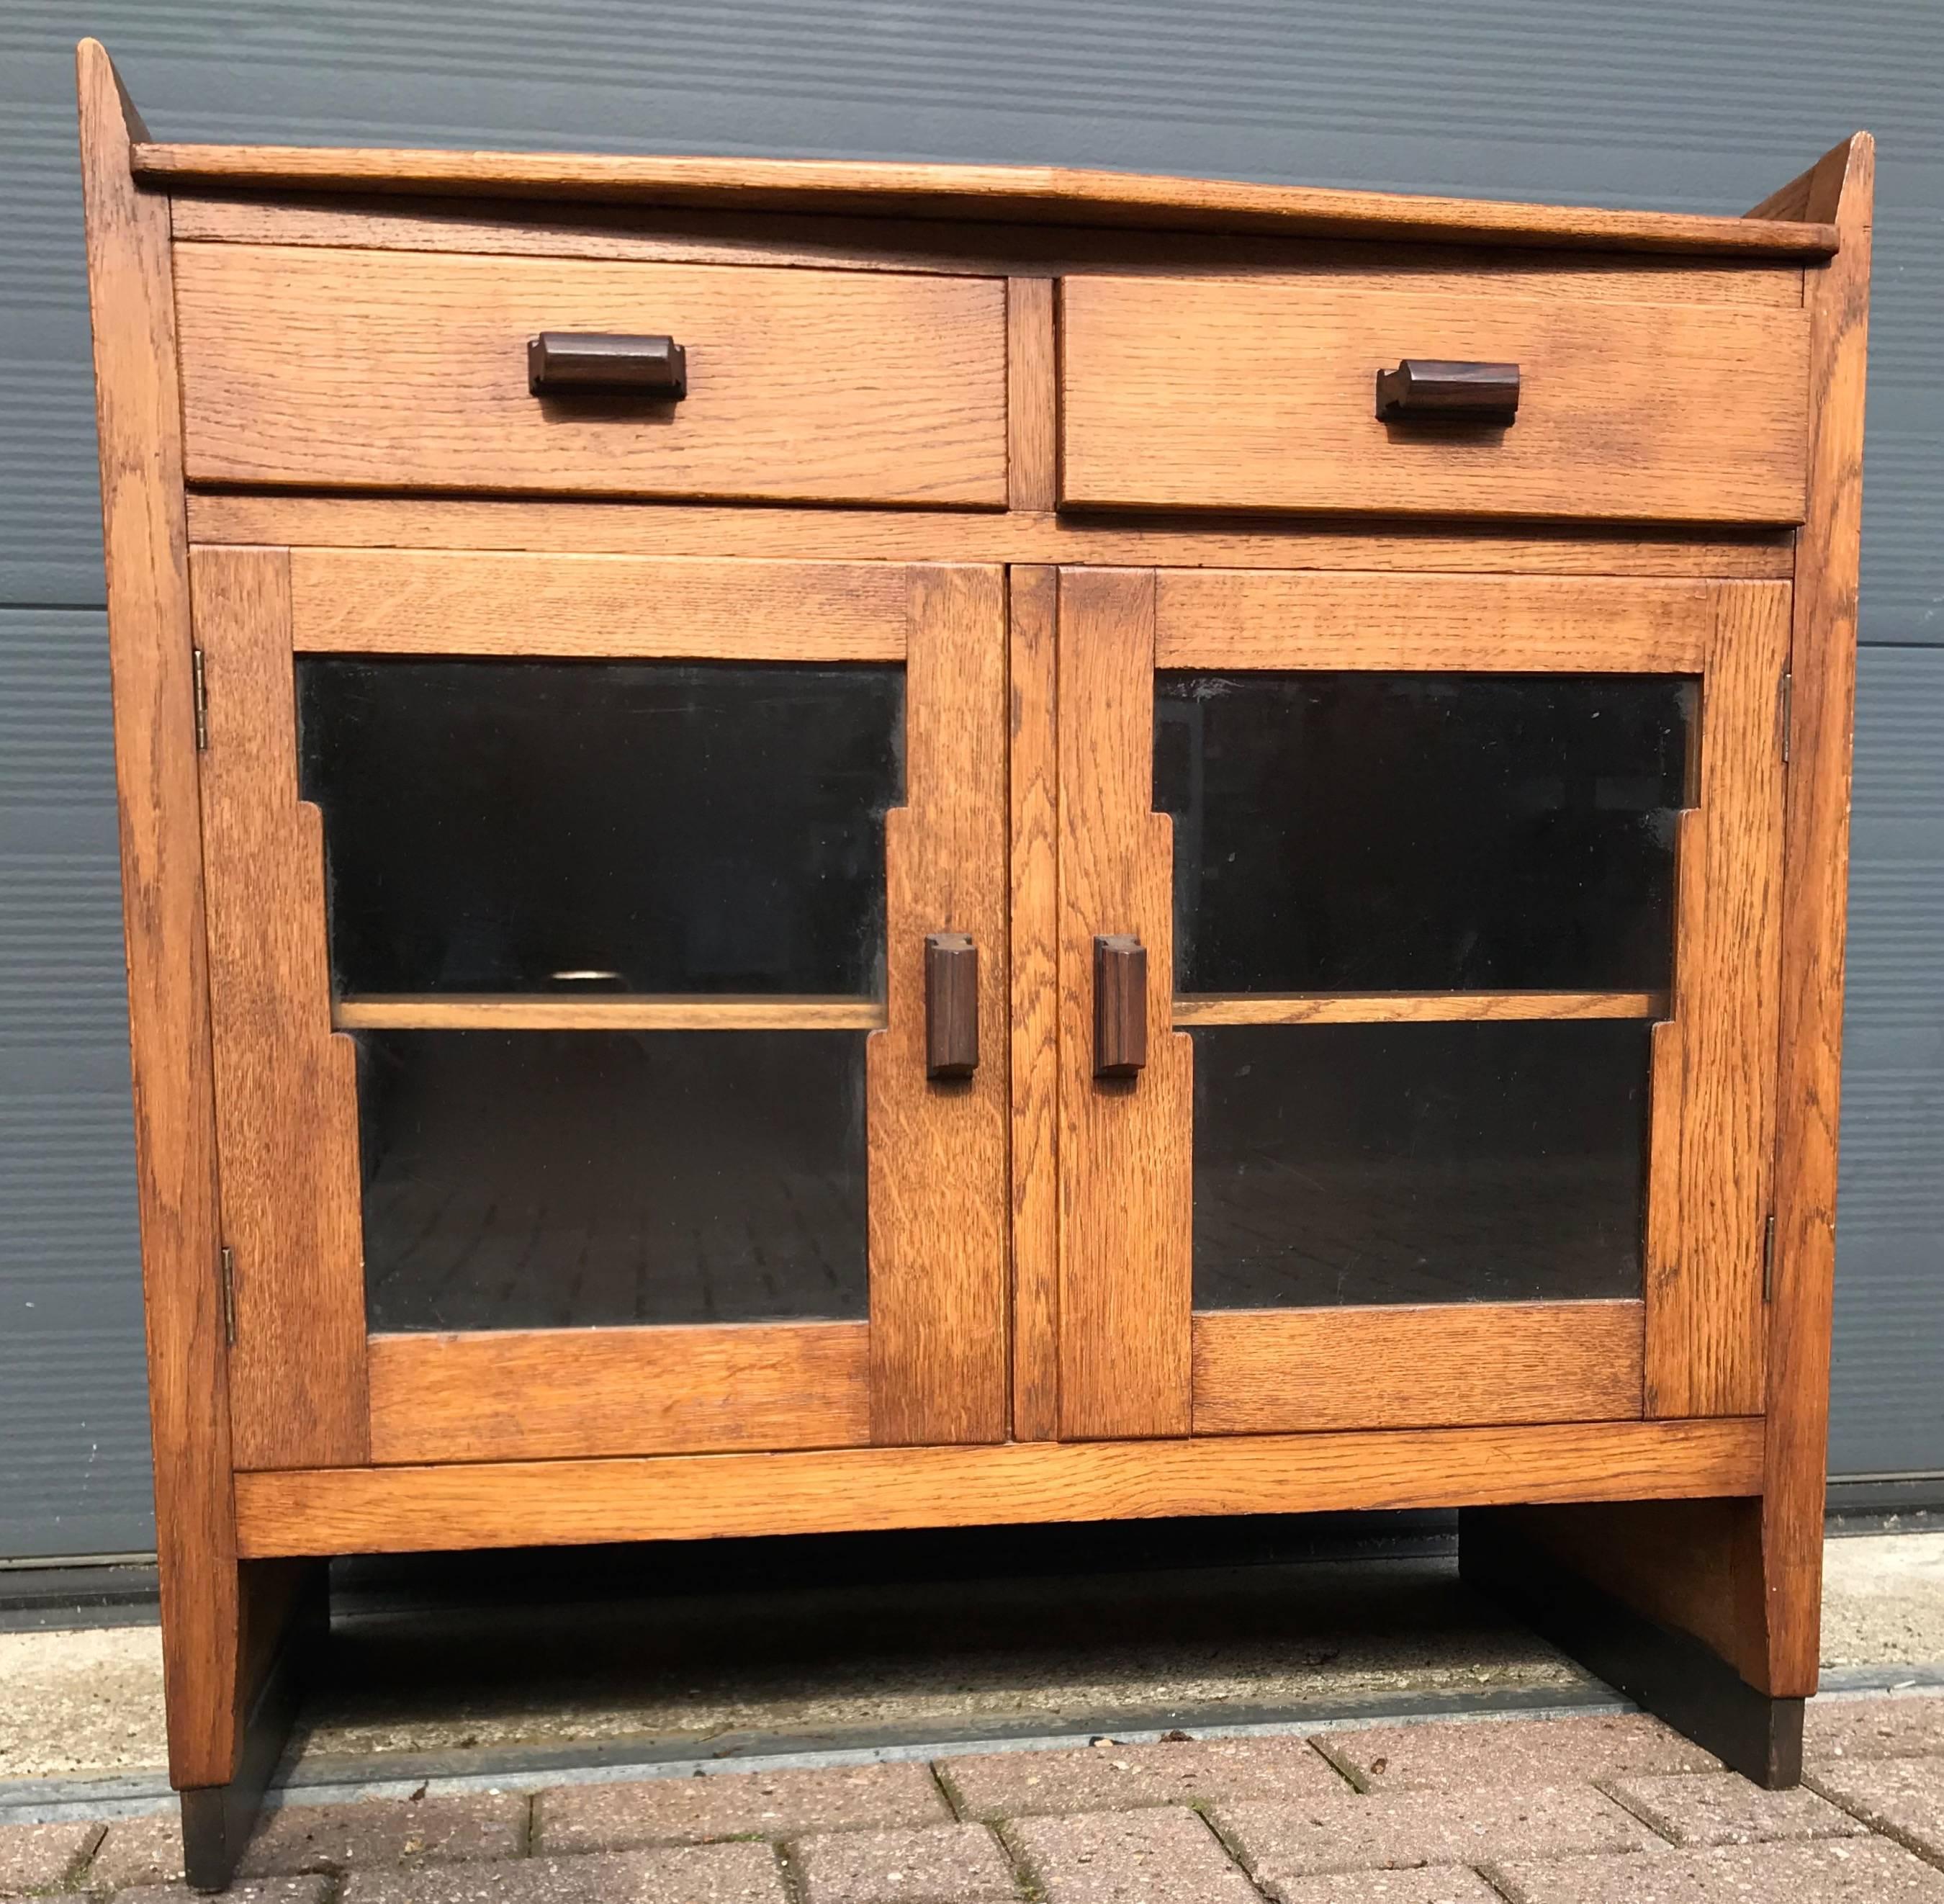 Beautiful design Amsterdam School drinks cabinet. 

This early 20th century design drinks cabinet is in the style of the Amsterdam School and the contrast in the light oak and the dark Macassar style elements makes it a joy to use and look at. This